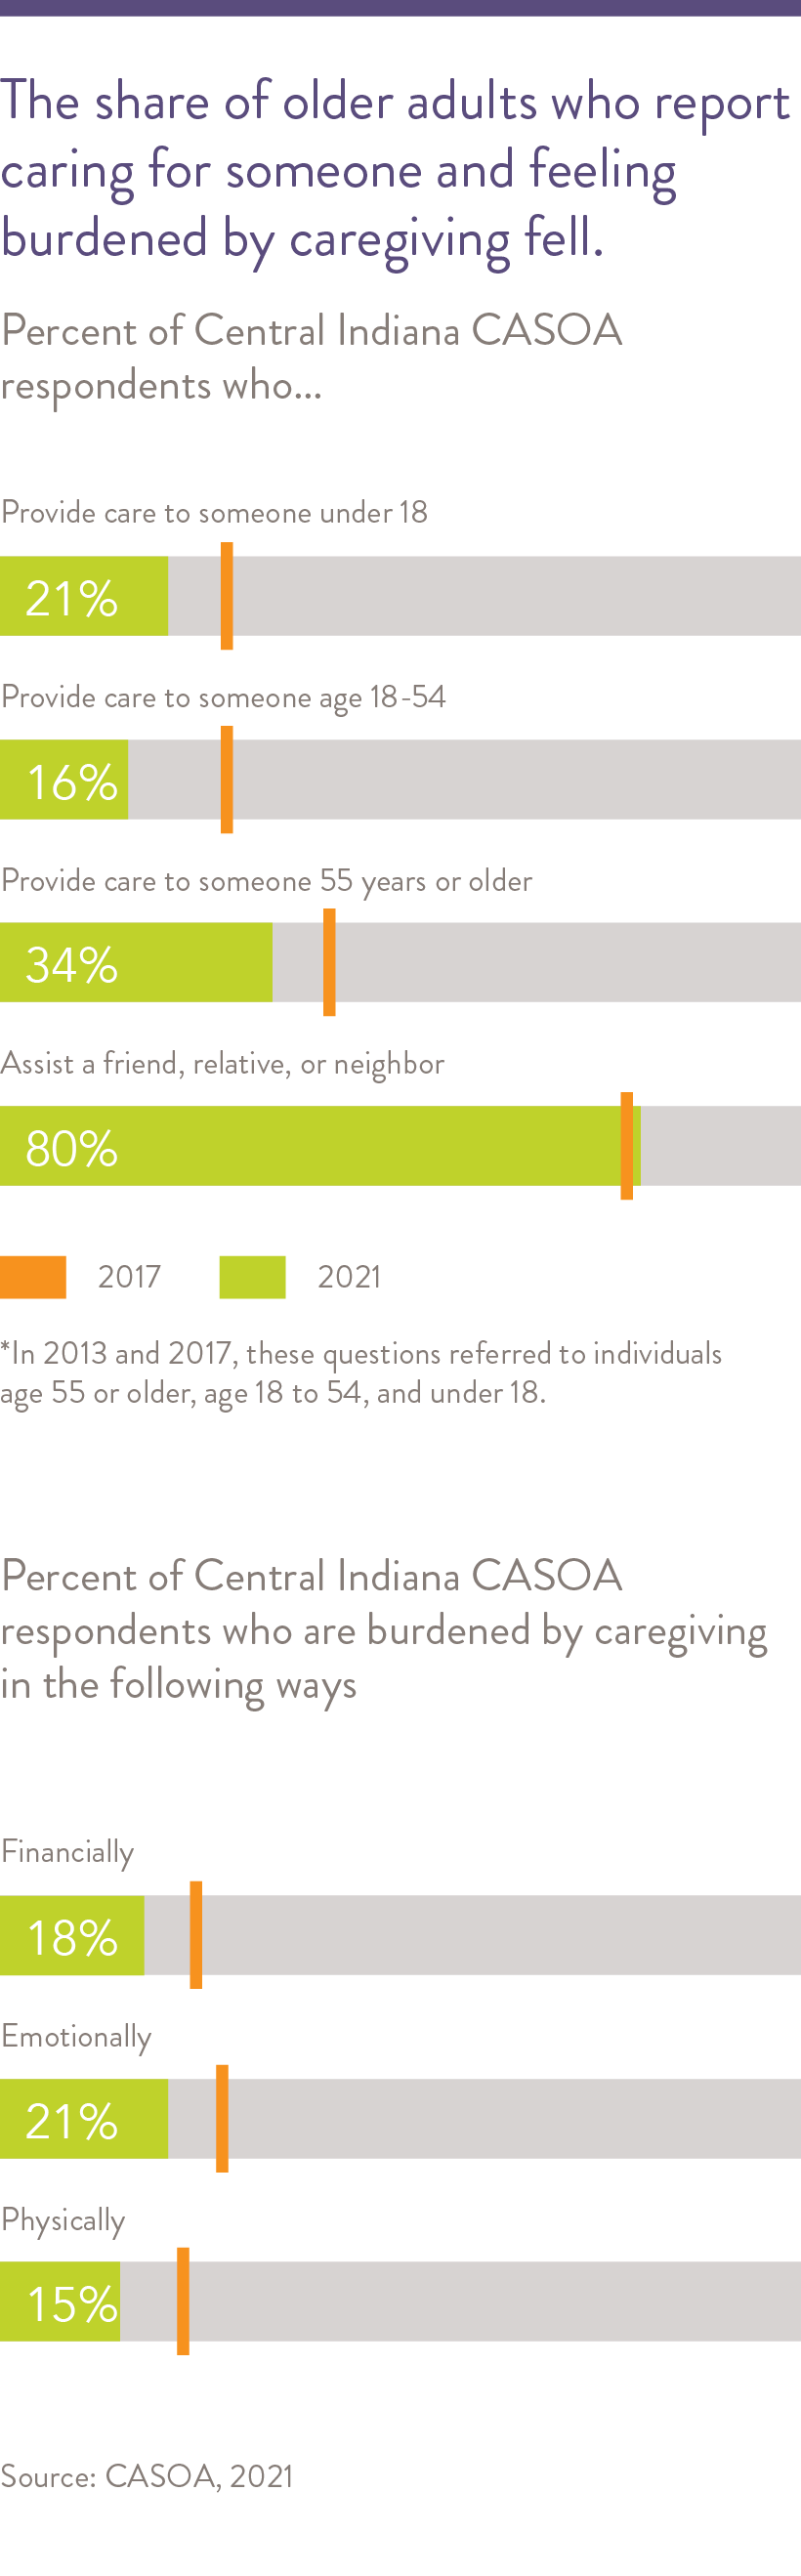 The share of older adults who report caring for someone and feeling burdened by caregiving fell.